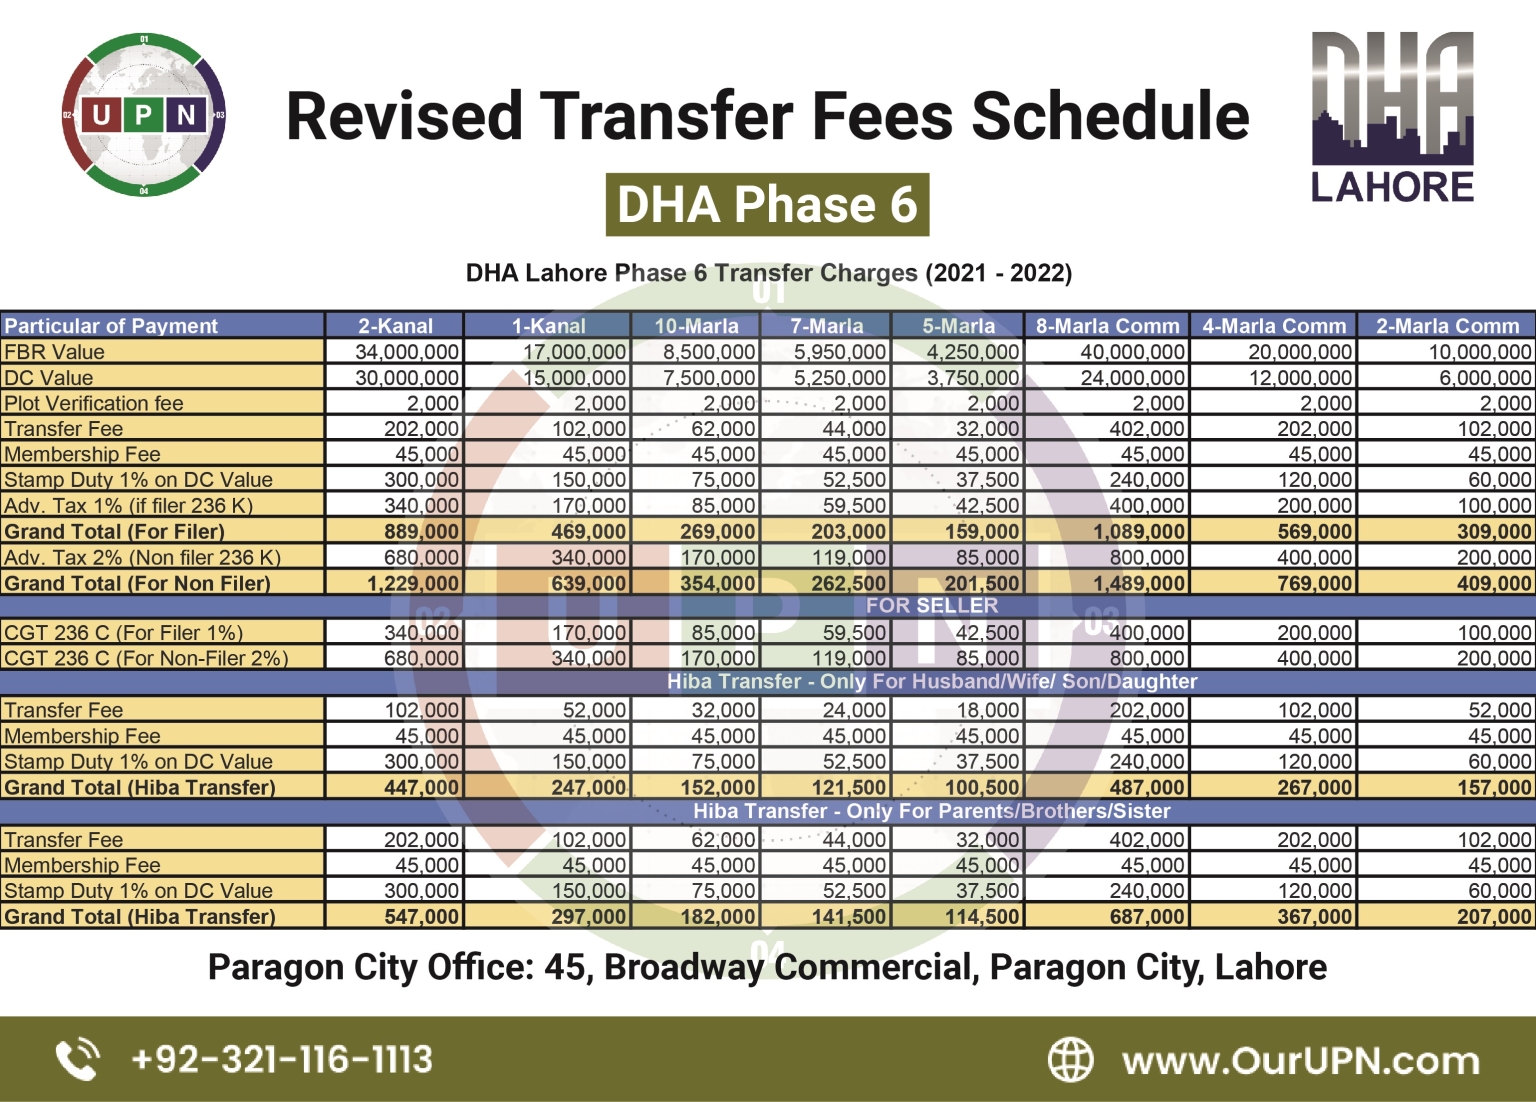 DHA Lahore Phase 6 Transfer Fees Schedule 20212022 UPN